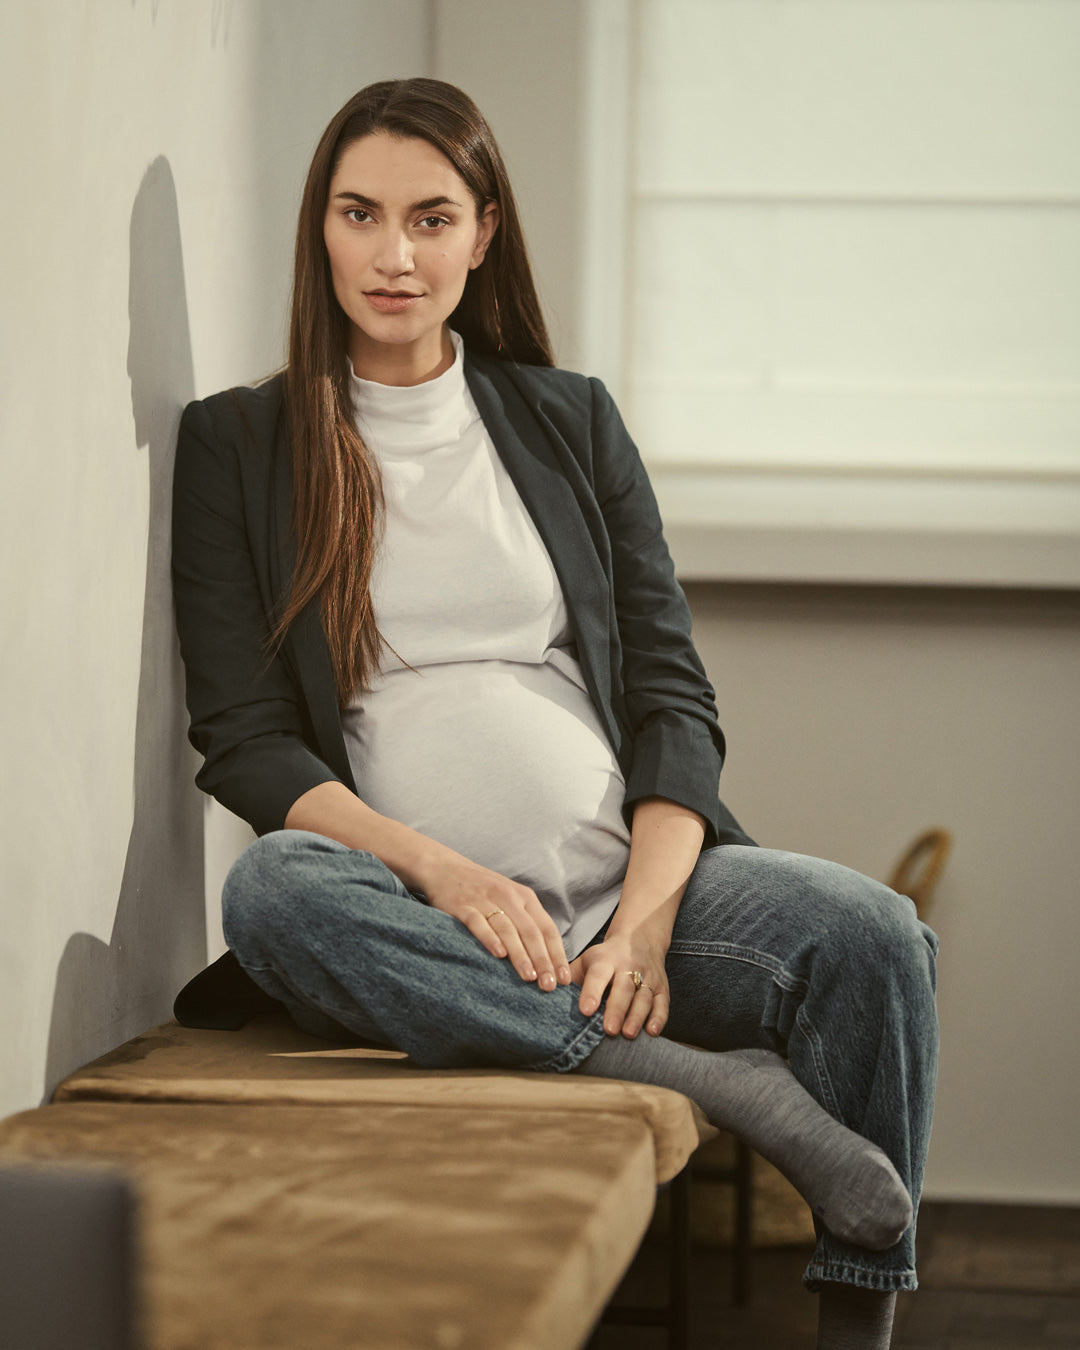 Pregnant woman sitting on a table with compression socks.